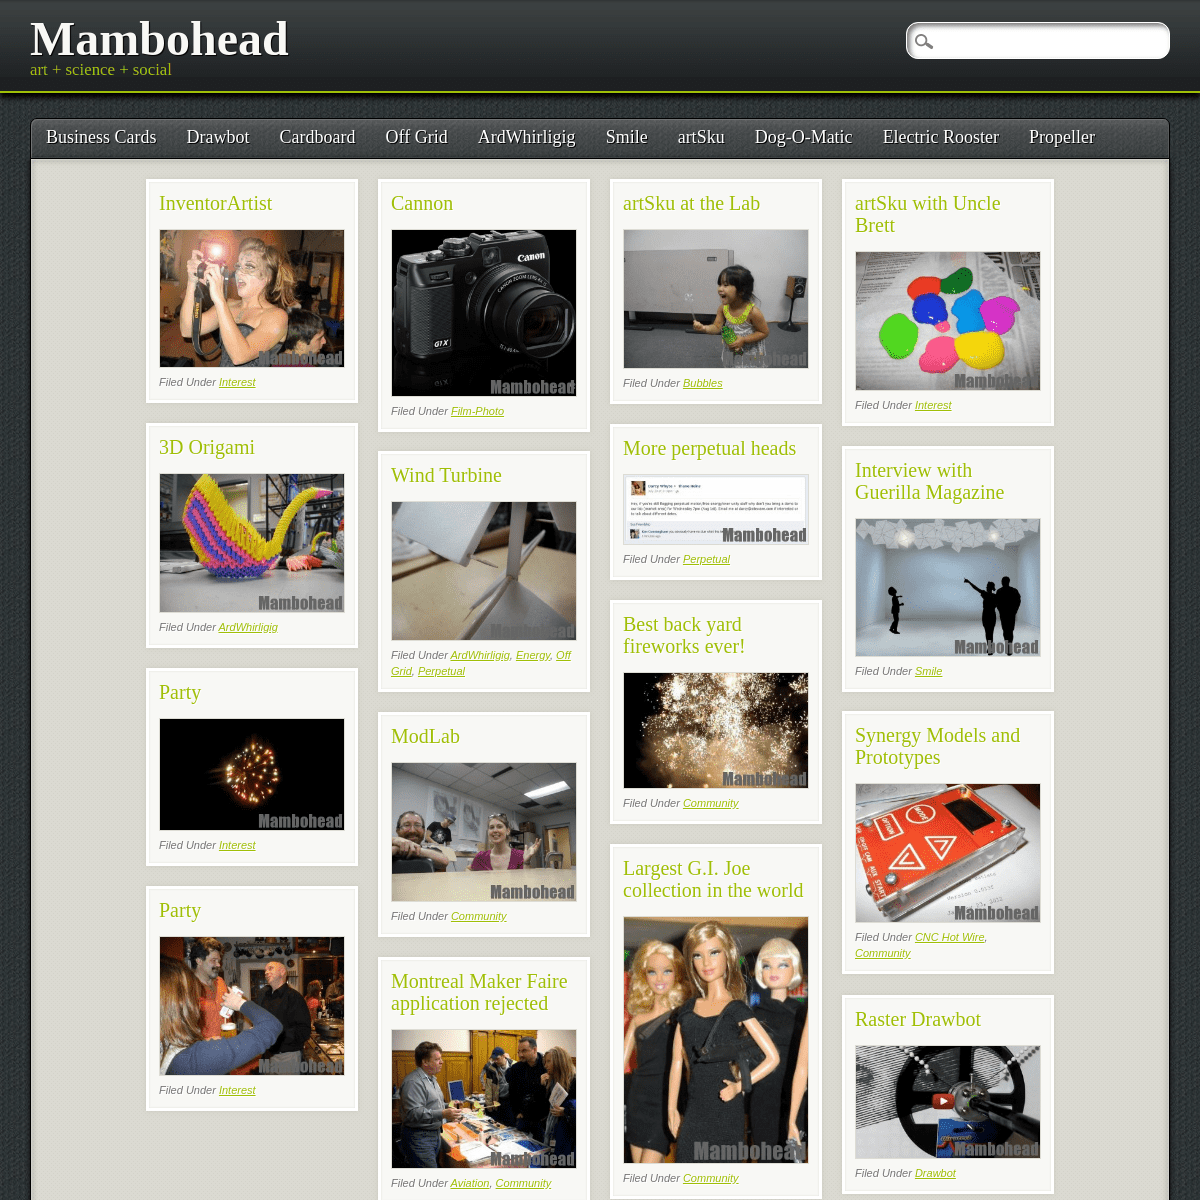 A complete backup of mambohead.com